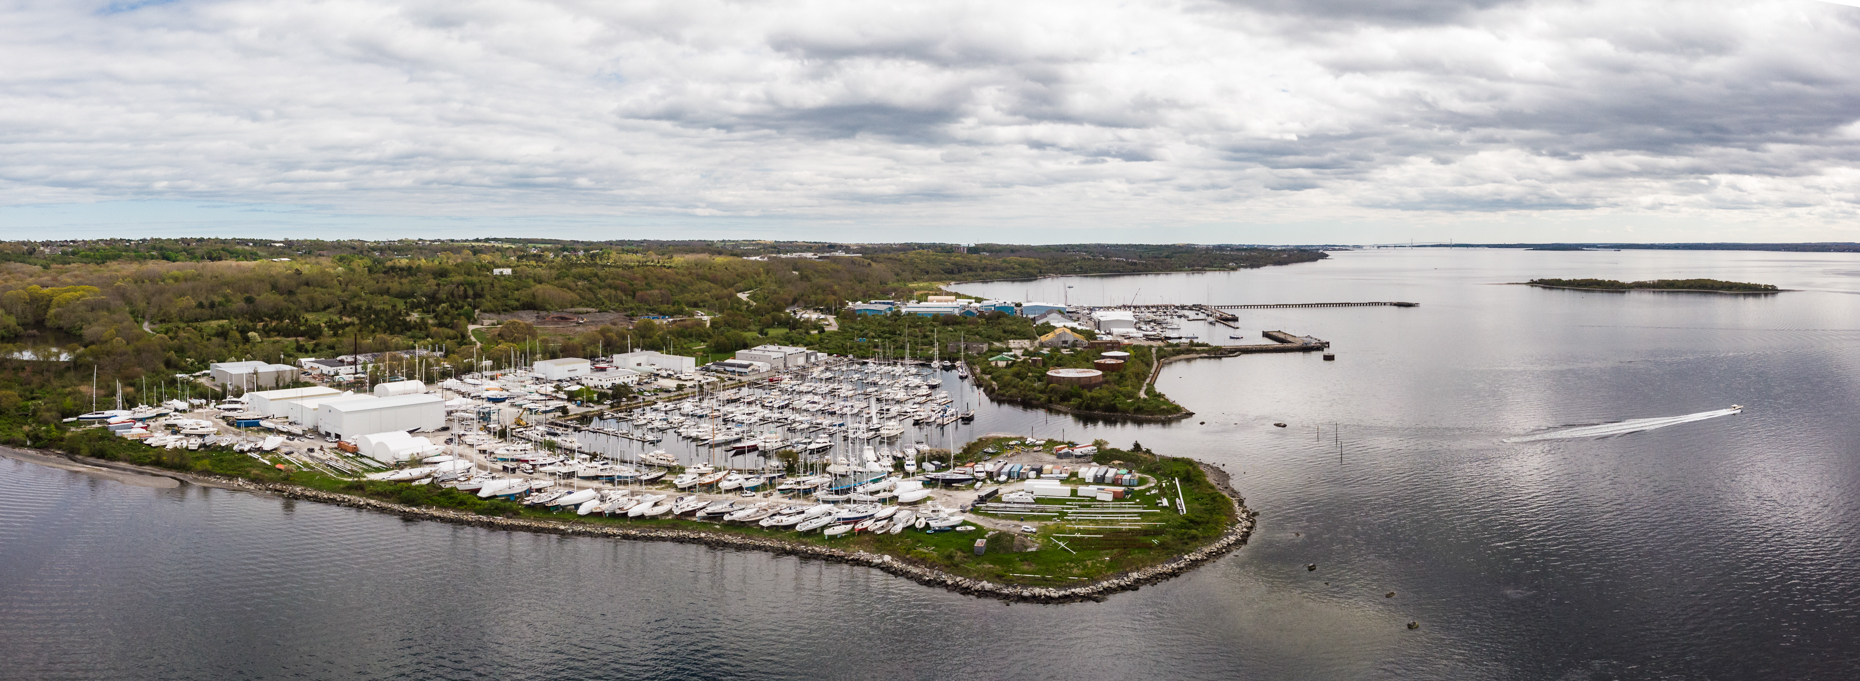 Aerial photo of Safe Harbor Marina with a boat exiting in Portsmouth RI, image taken by Architectural Photographers in North Carolina